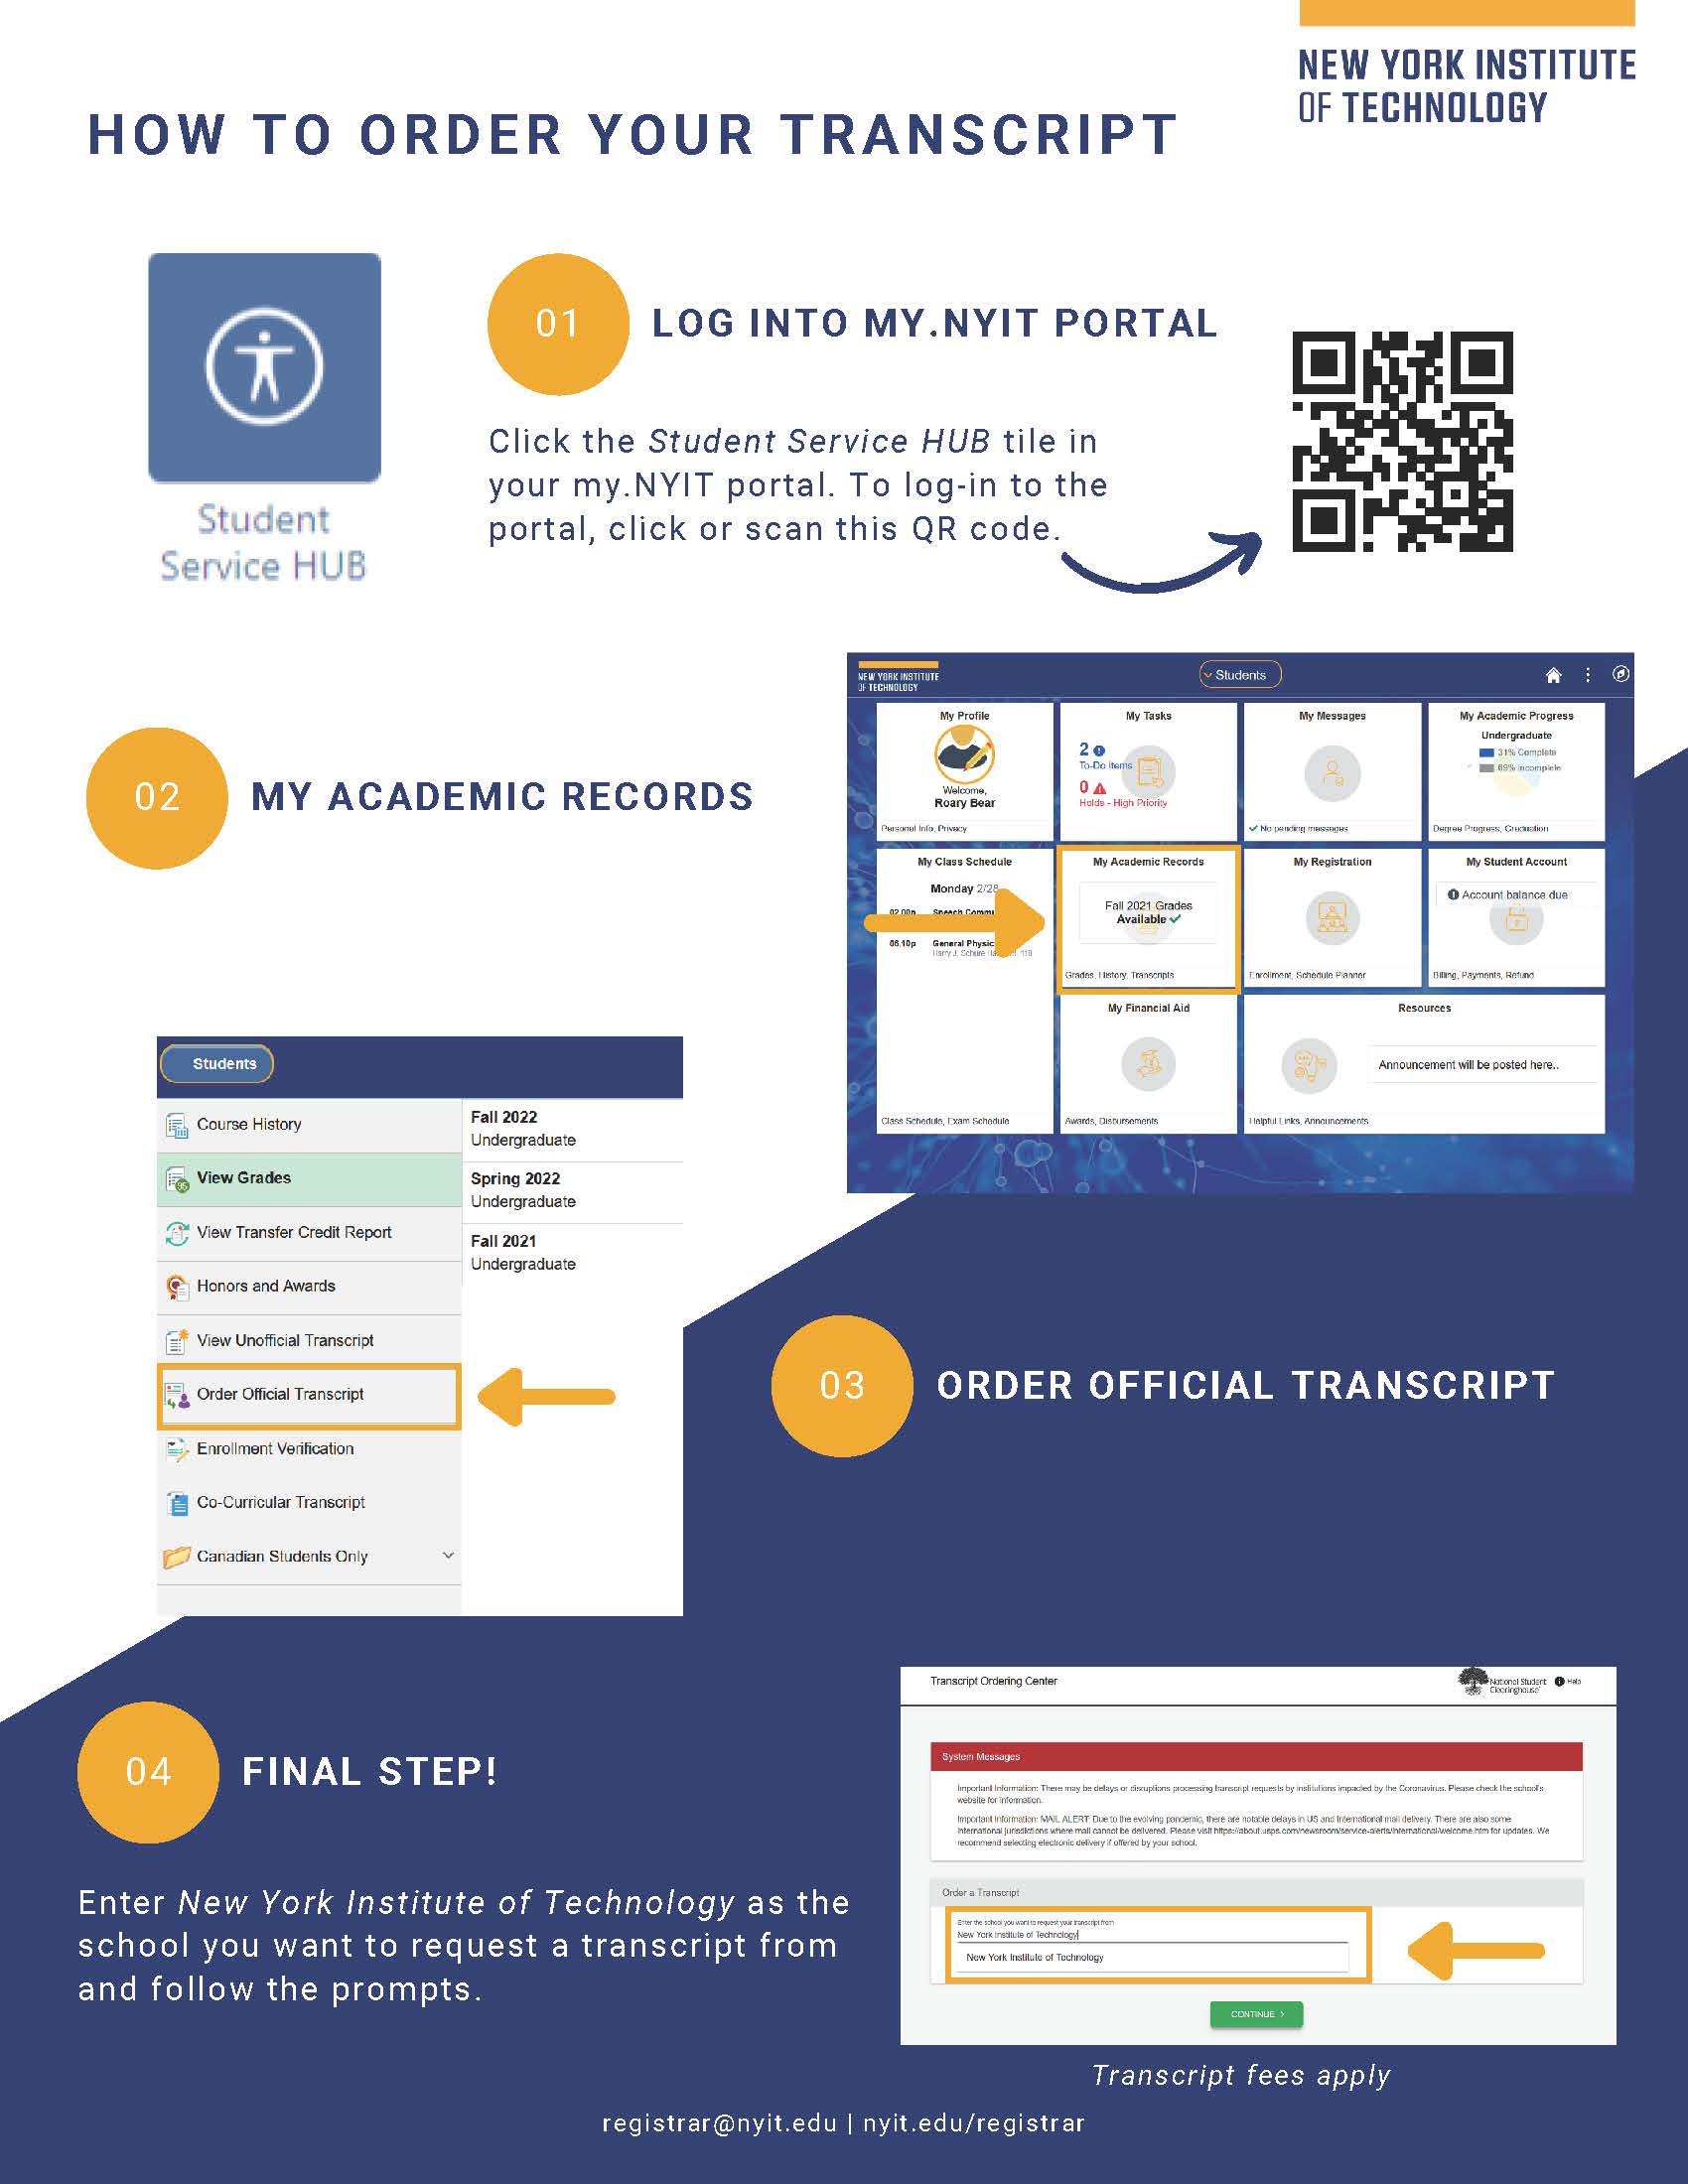 How to Order your Transcript